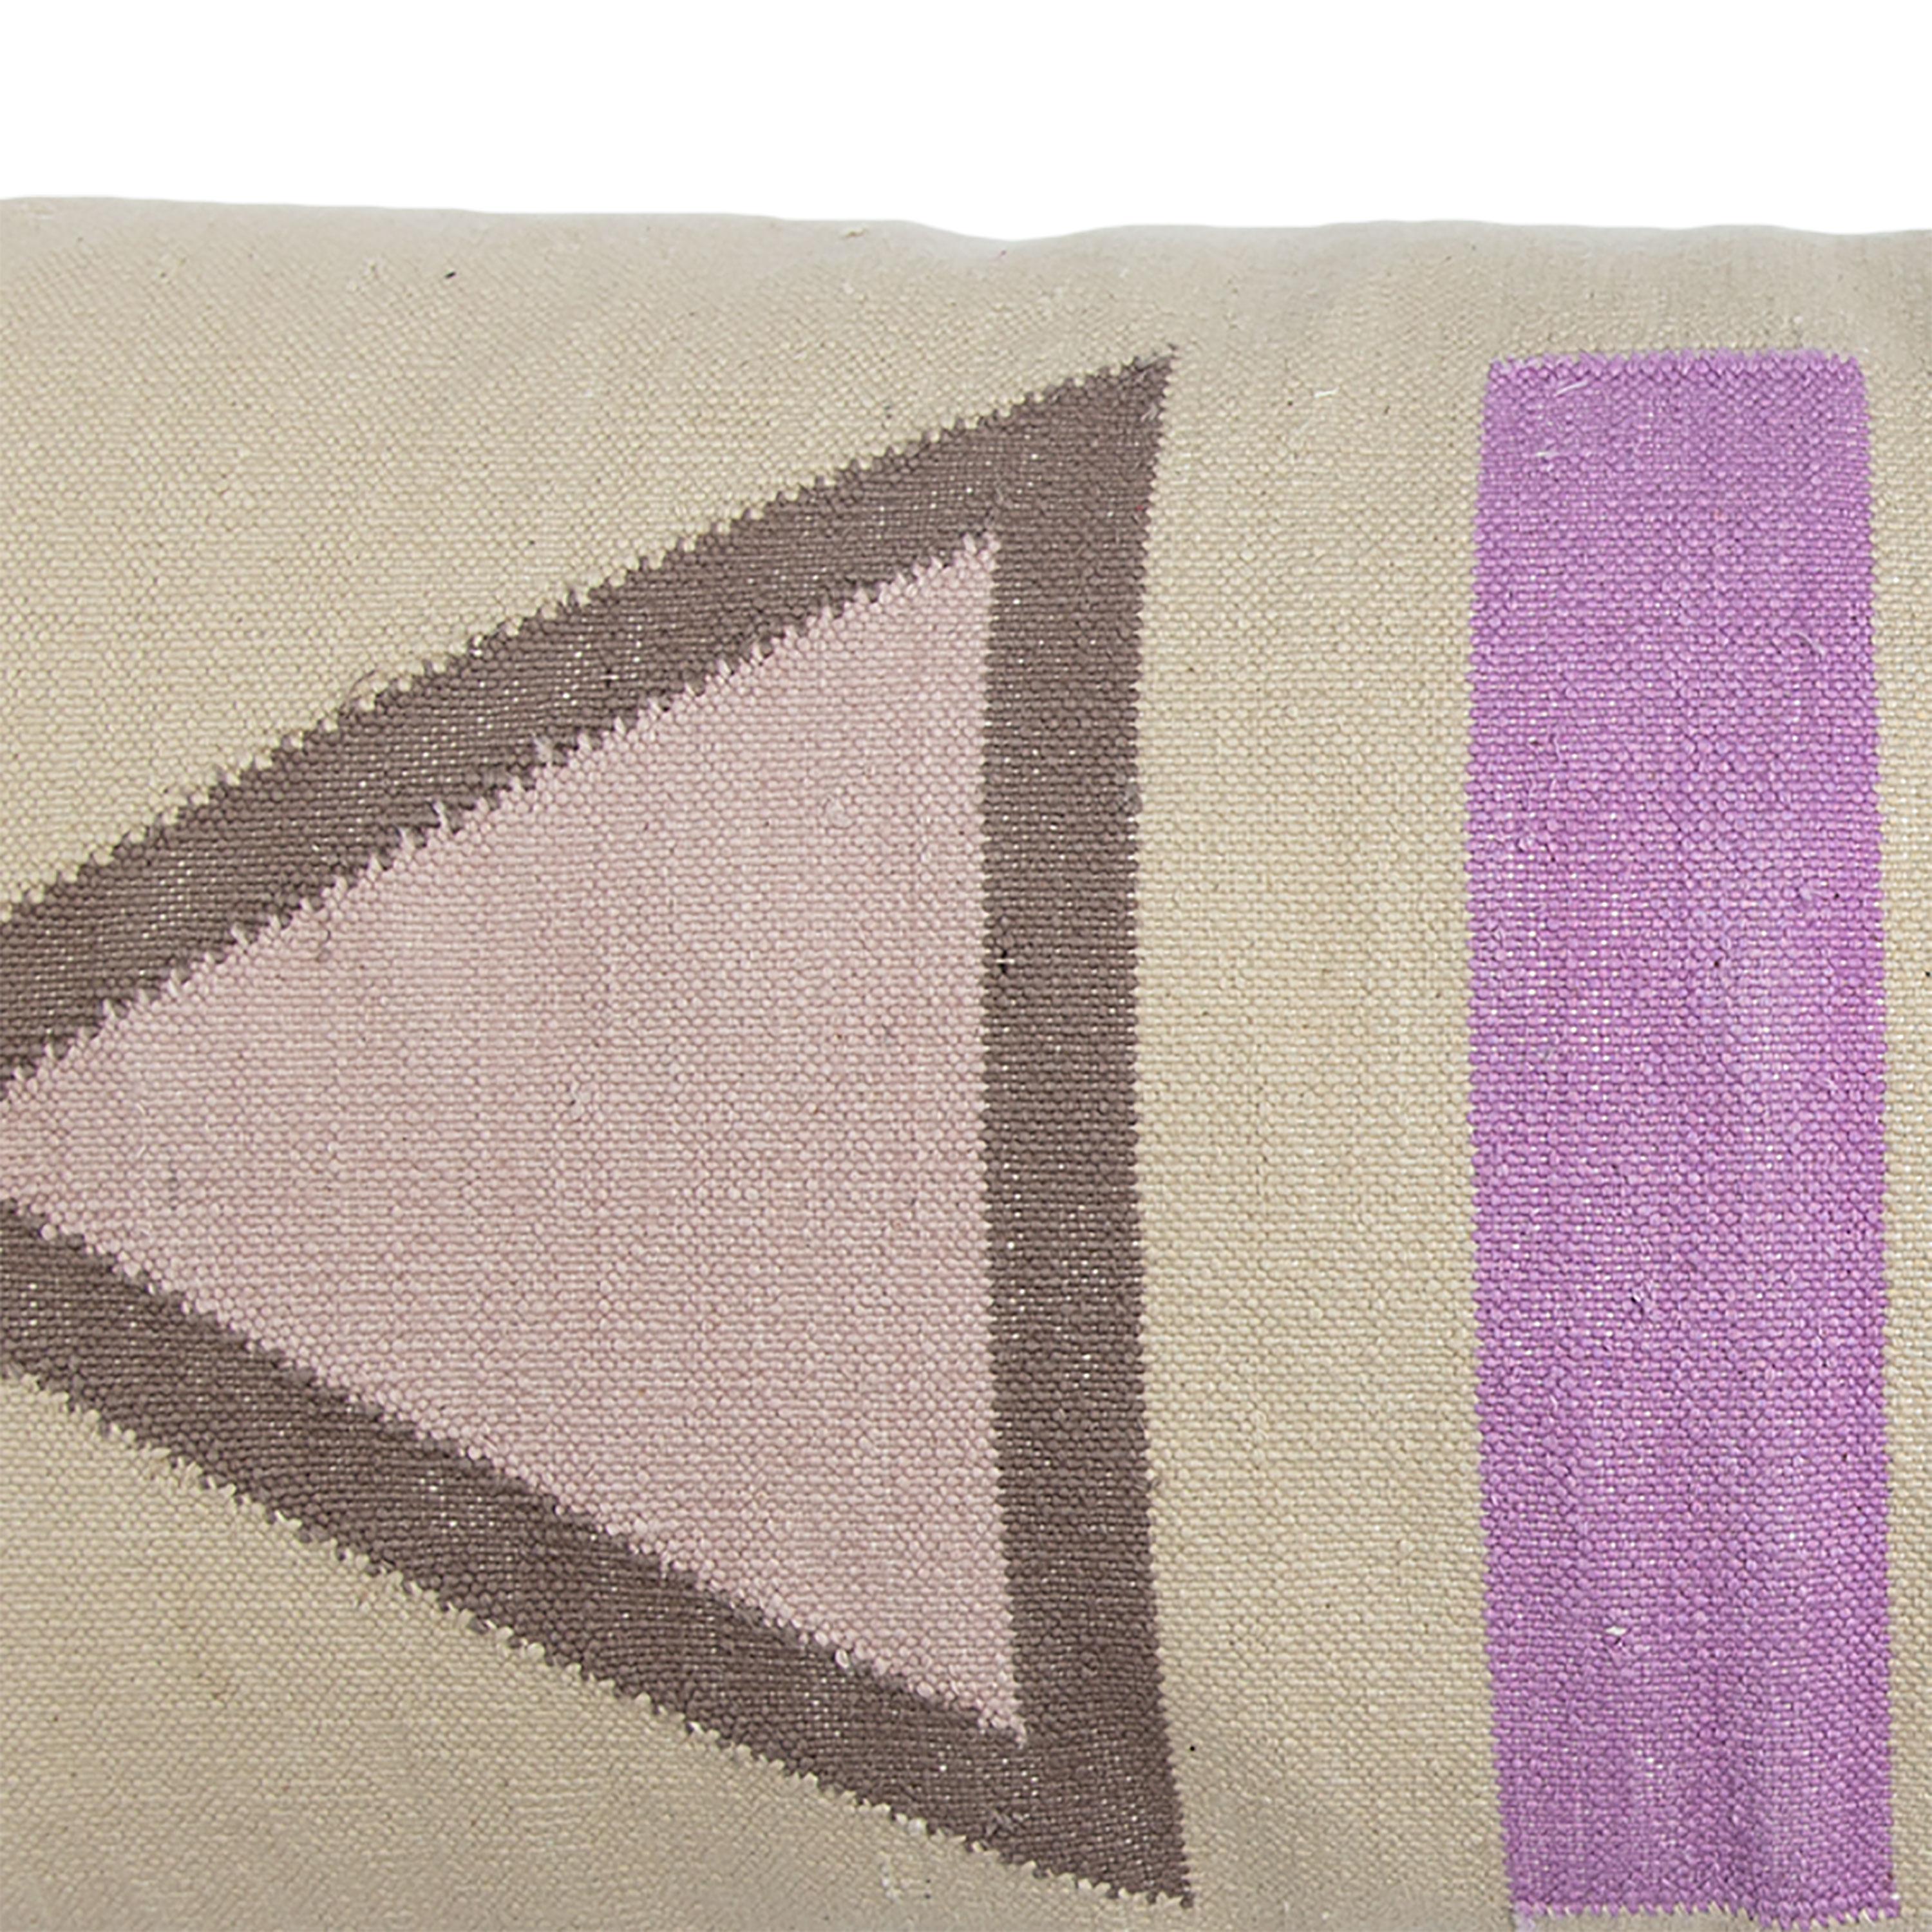 Our lumbar throw pillows are ethically hand woven by artisans in Rajasthan, India, using a traditional weaving technique which is native to this region.

The purchase of this handcrafted pillow helps to support the artisans and preserve their